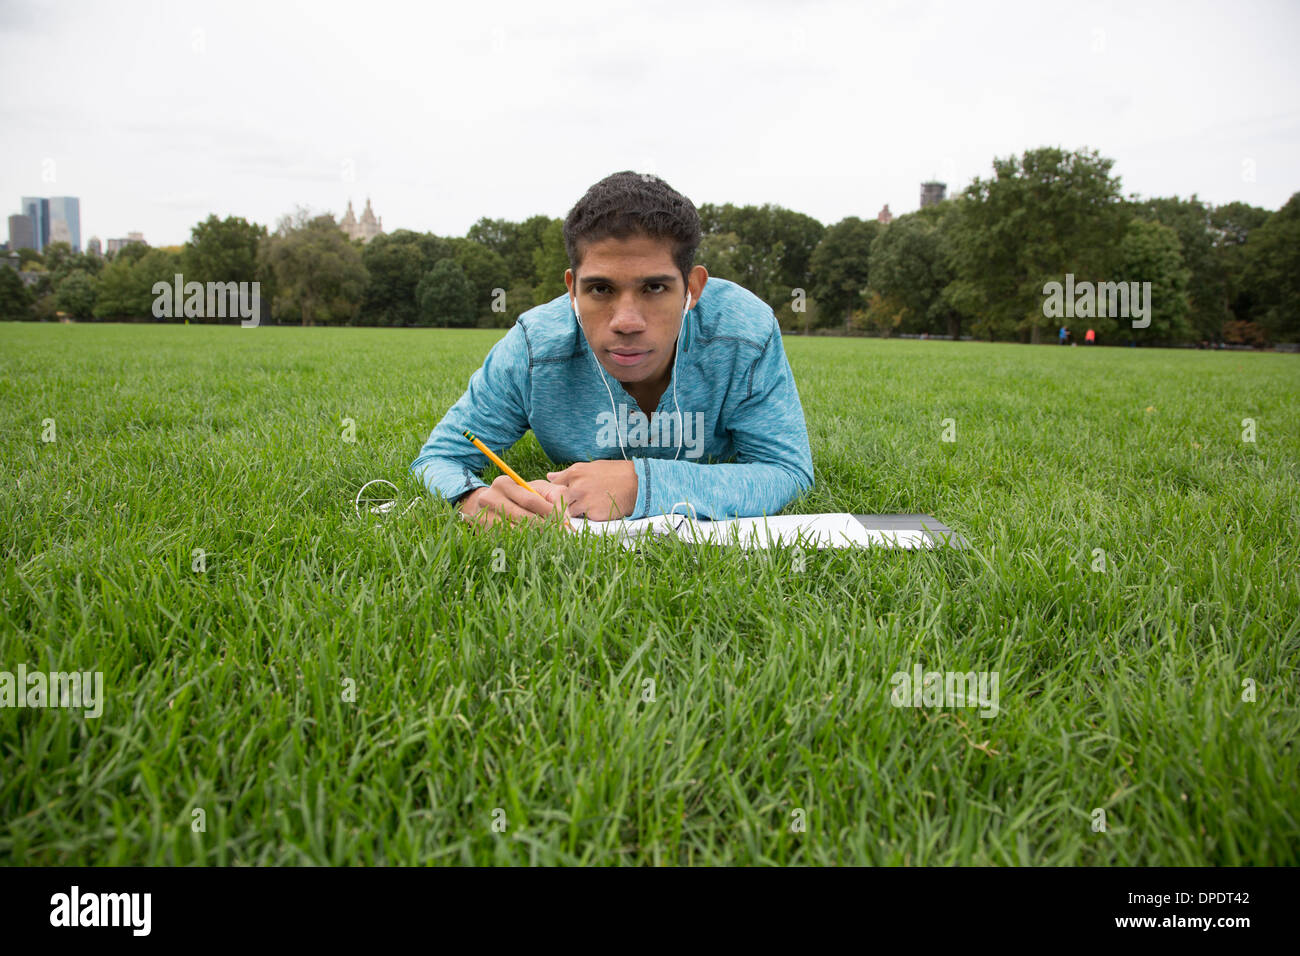 Young man lying on grass doing homework Banque D'Images